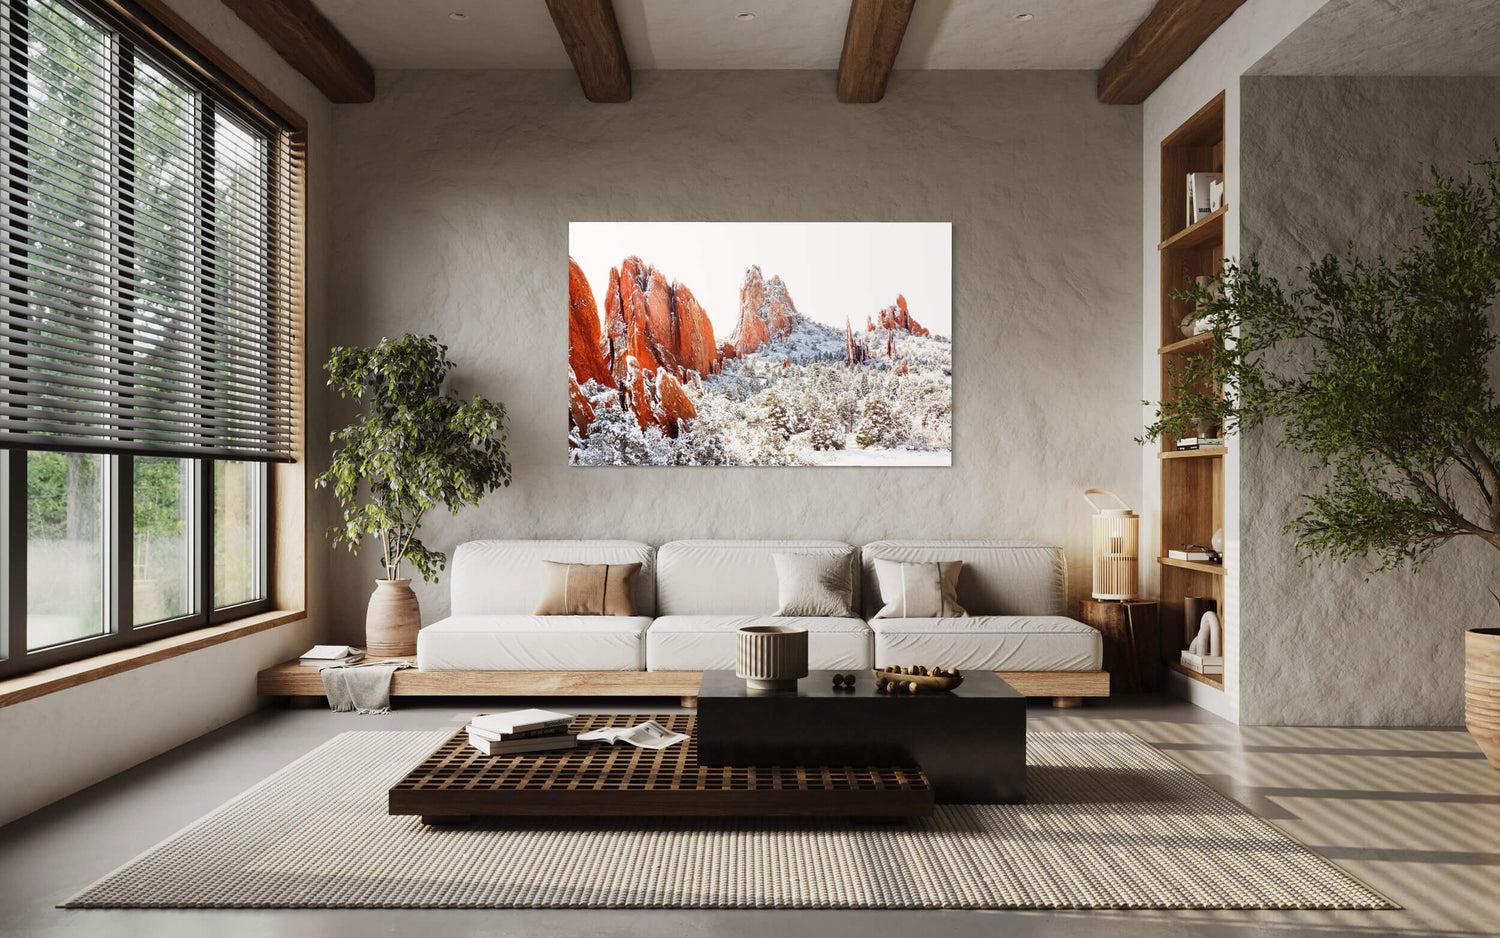 A piece of Colorado Springs art showing the Garden of the Gods in winter hangs in a living room.